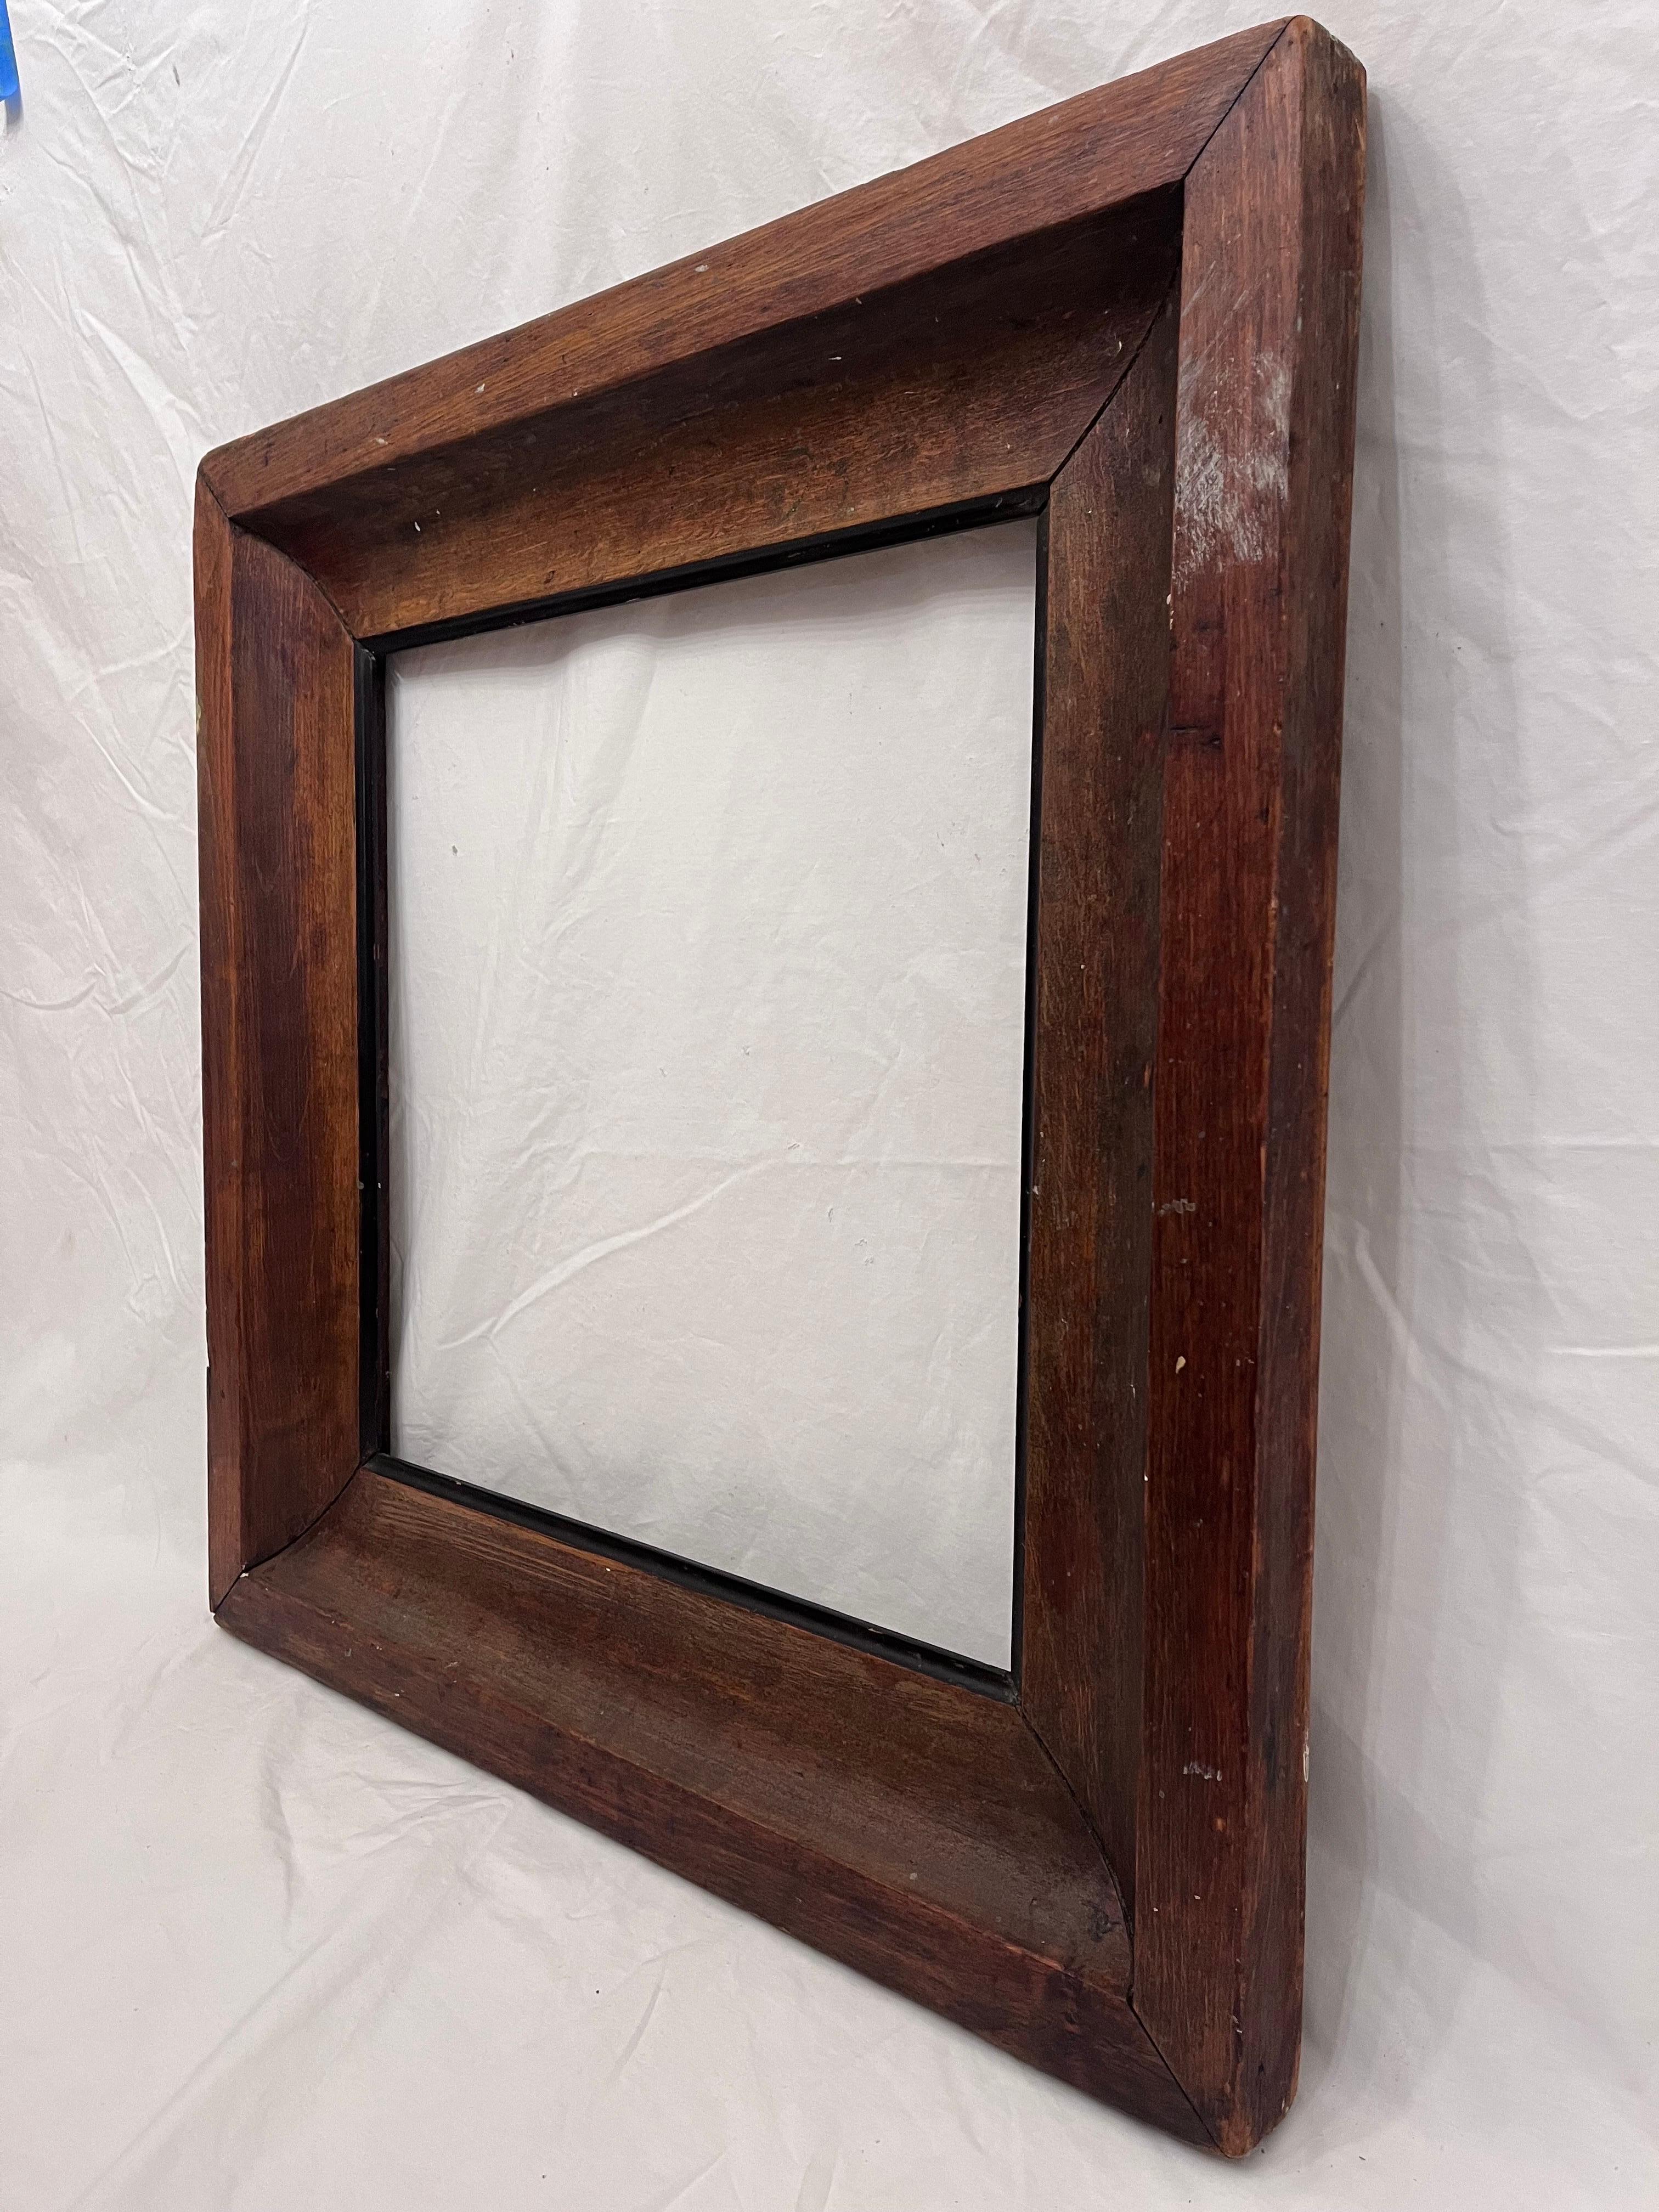 Arts and Crafts Early 20th Century American Modernist Crafts Style Square Picture Frame 18 x 18